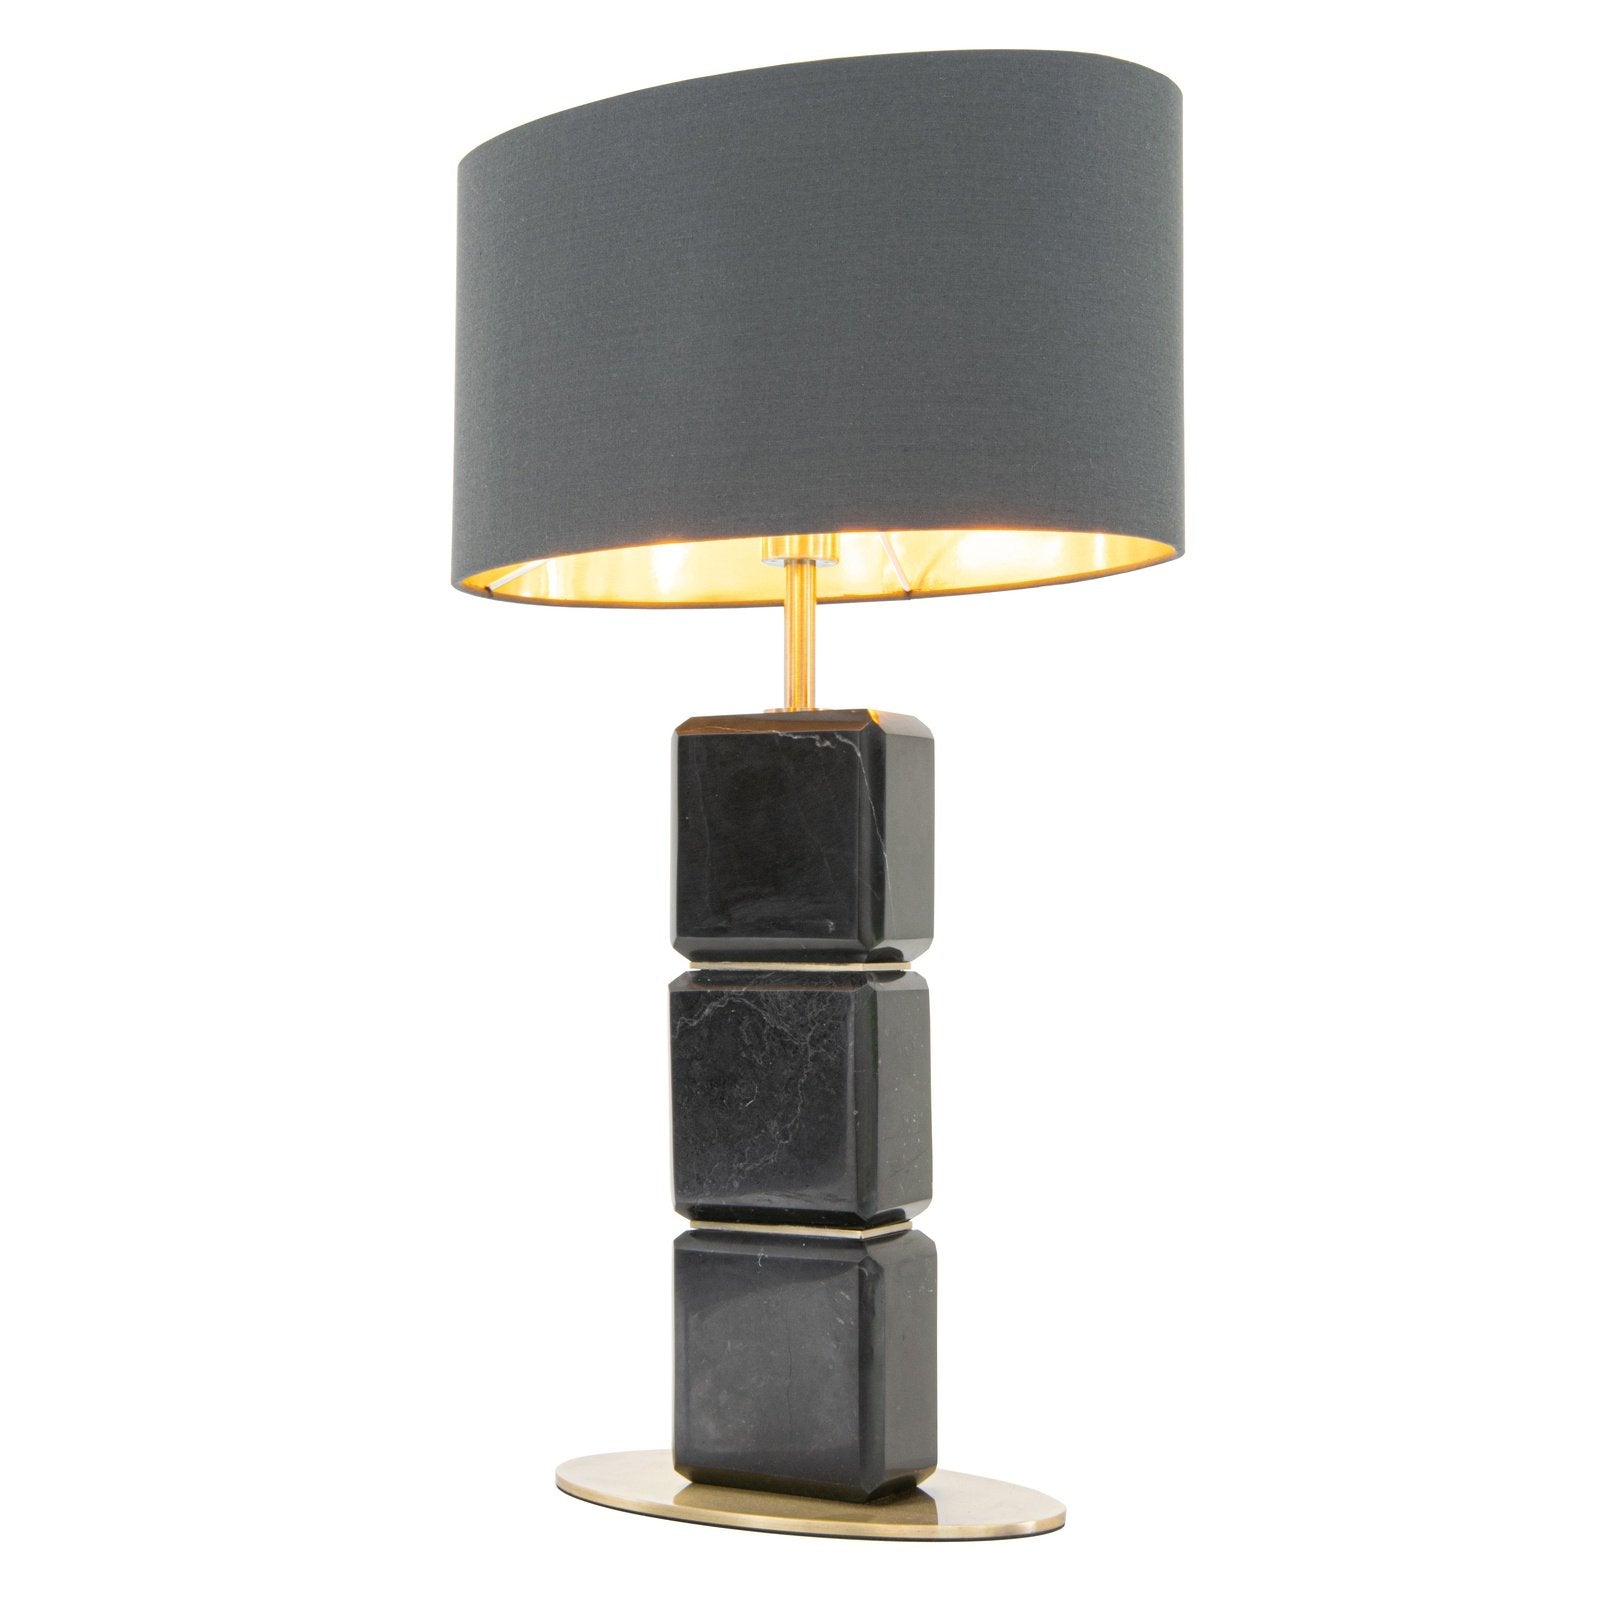 Cabo table lamp black marble brass base gold lined charcoal shade